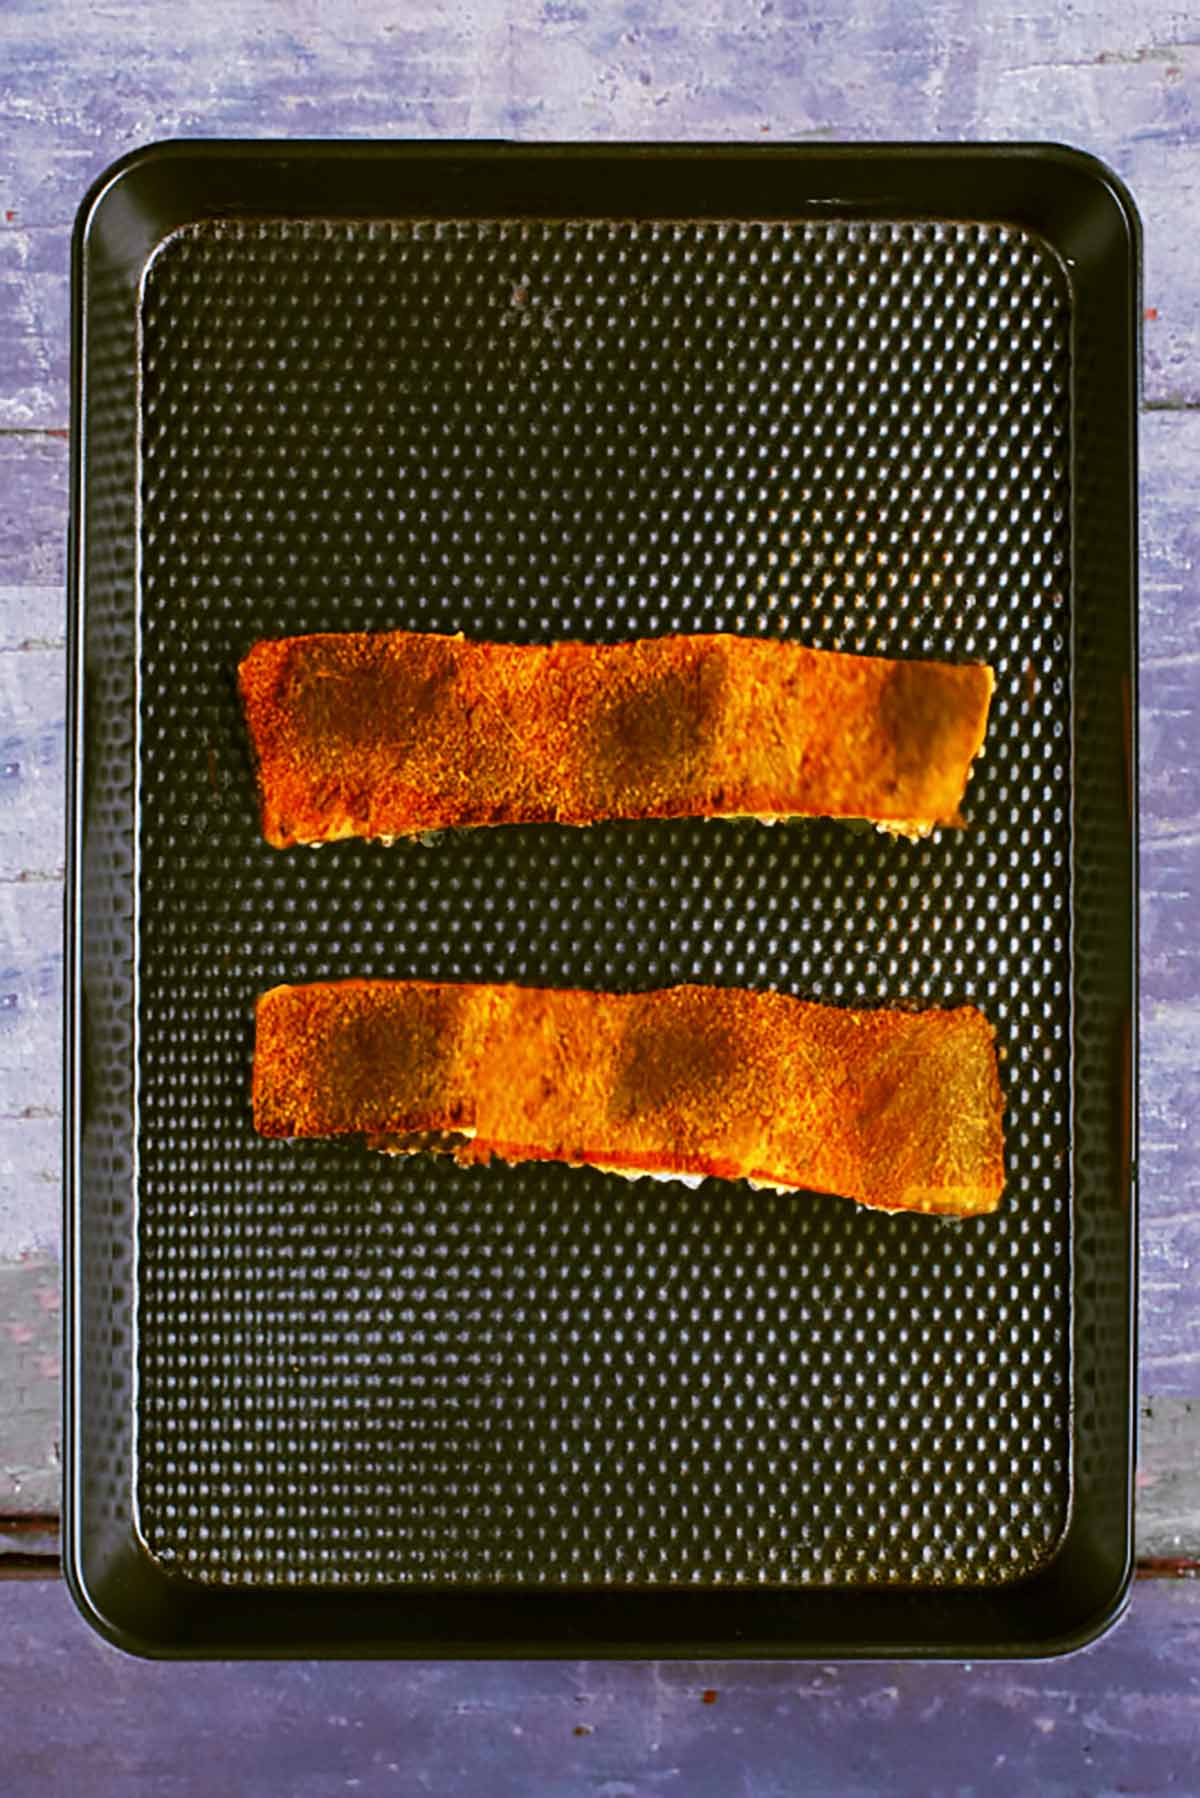 Two cooked seasoned salmon fillets on a black baking tray.